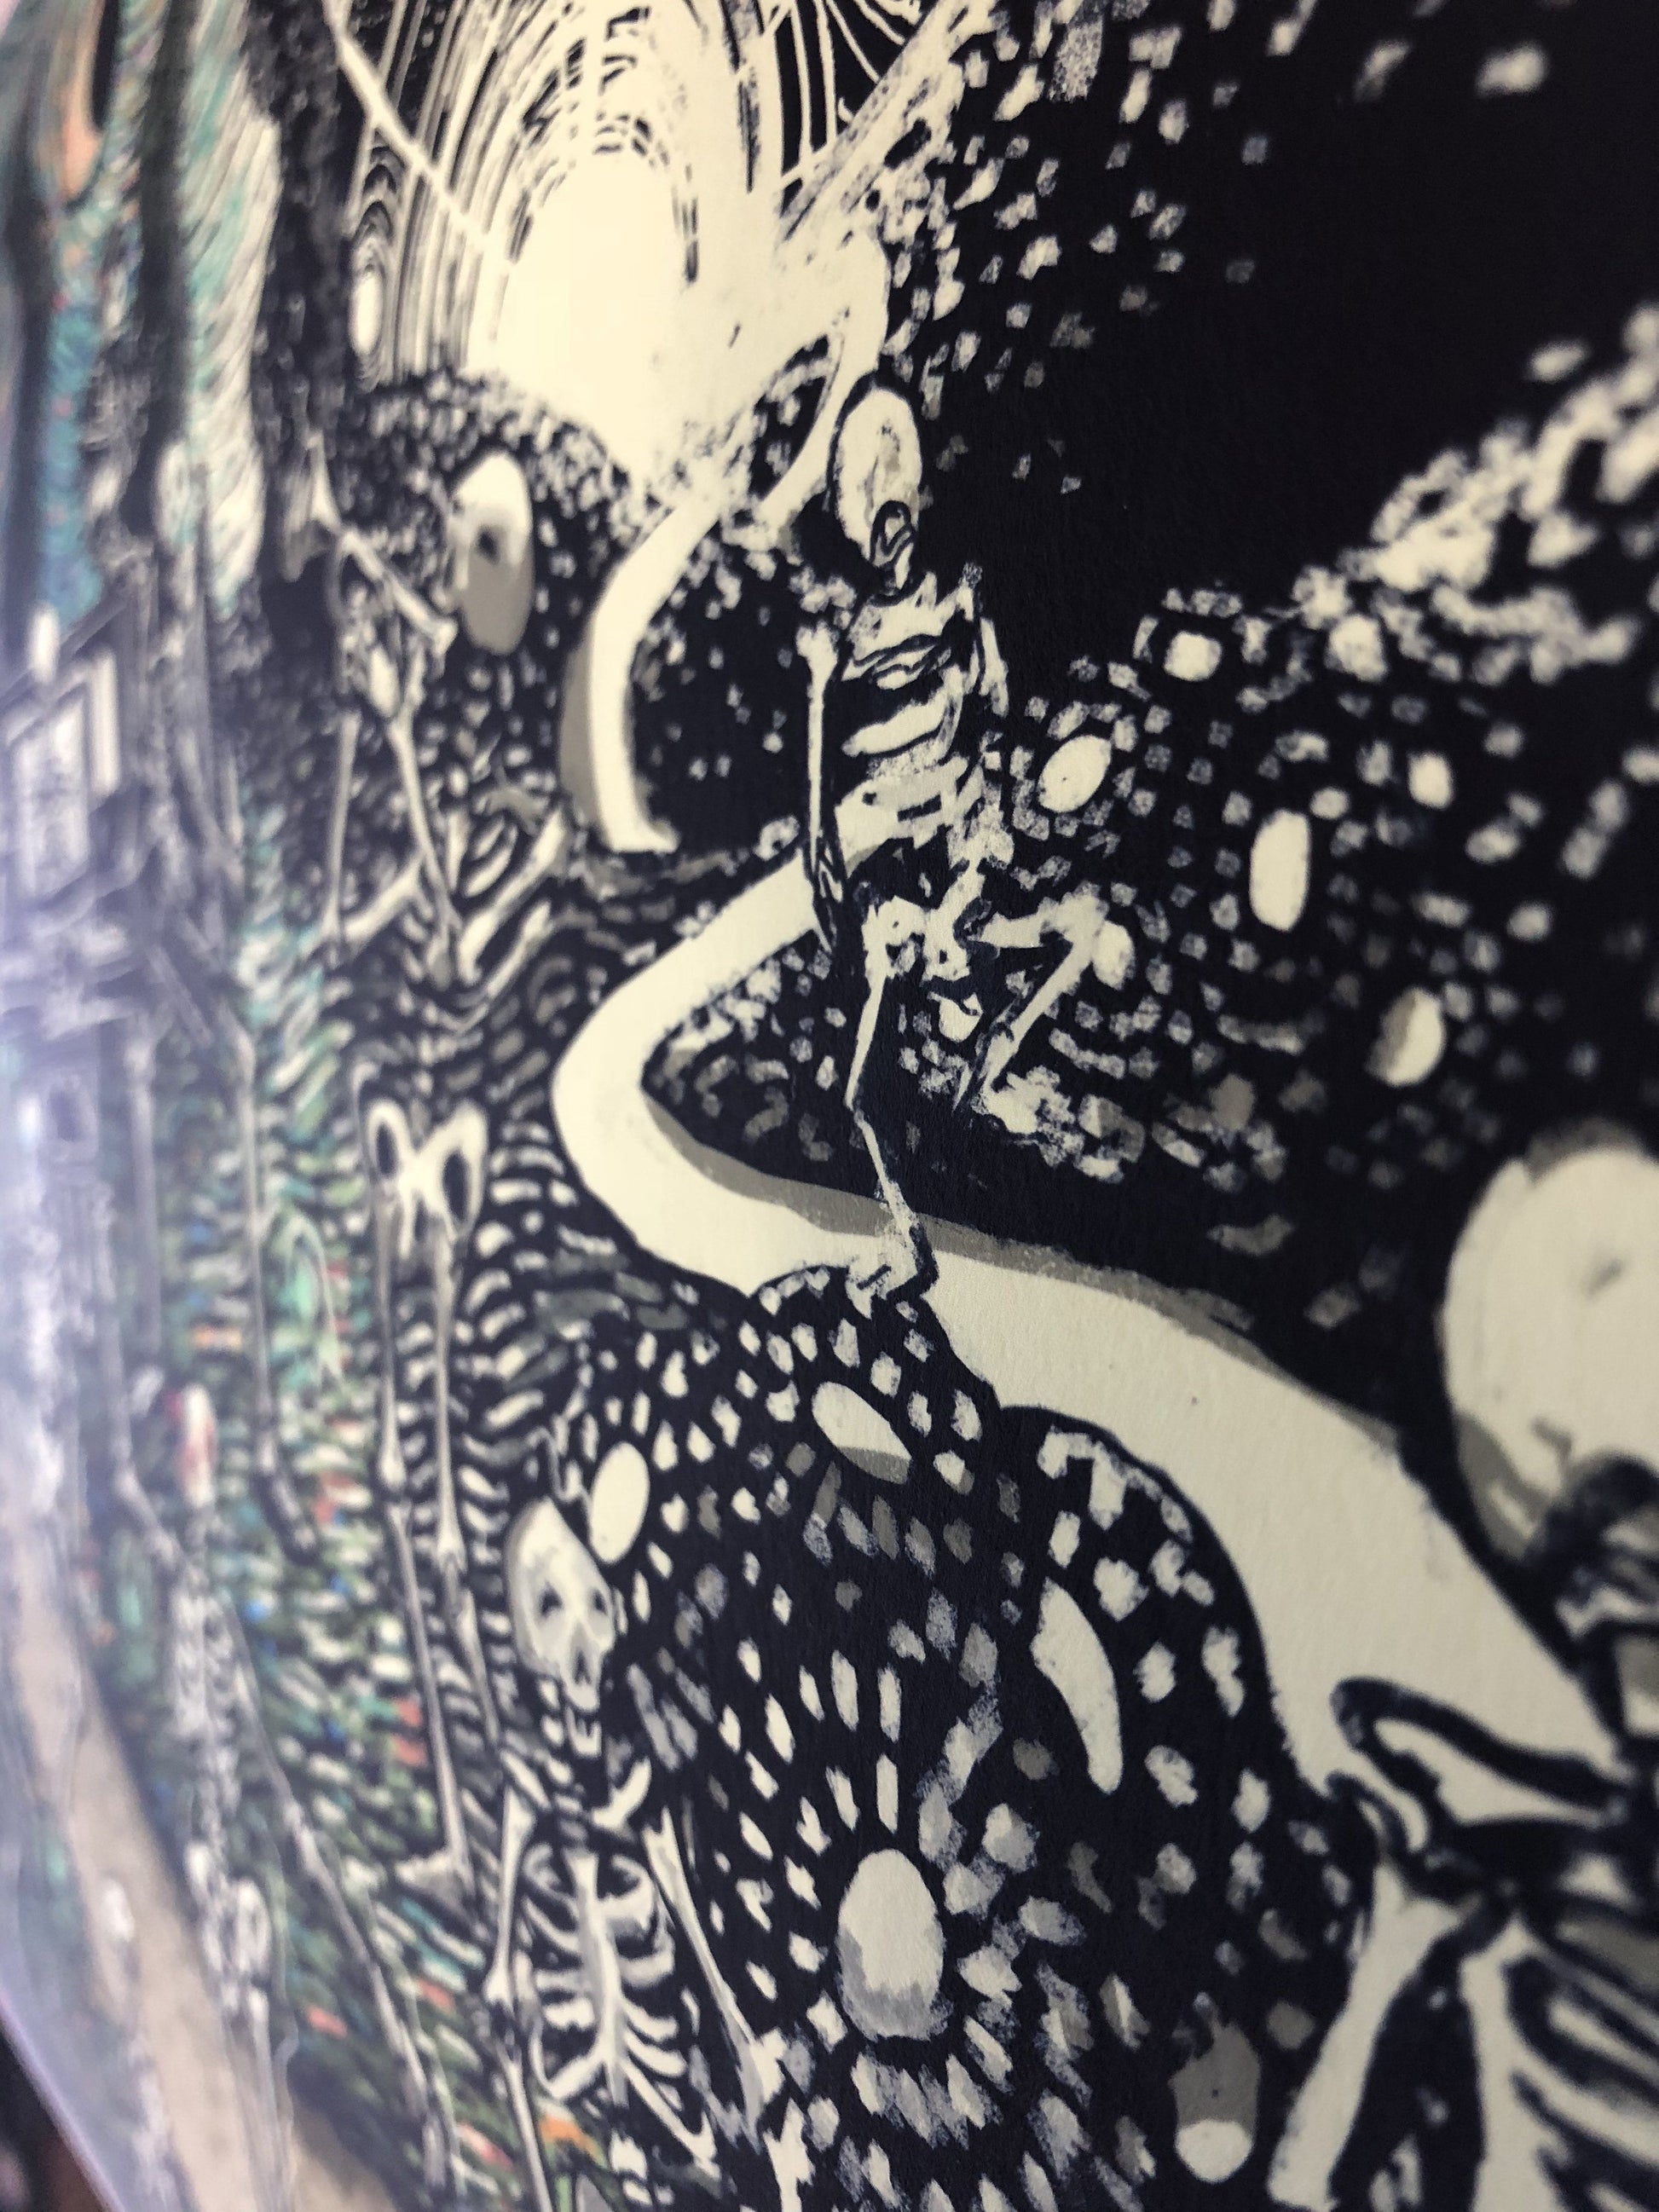 The Skully Mambo 4 (Limited Edition of 125) James R. Eads